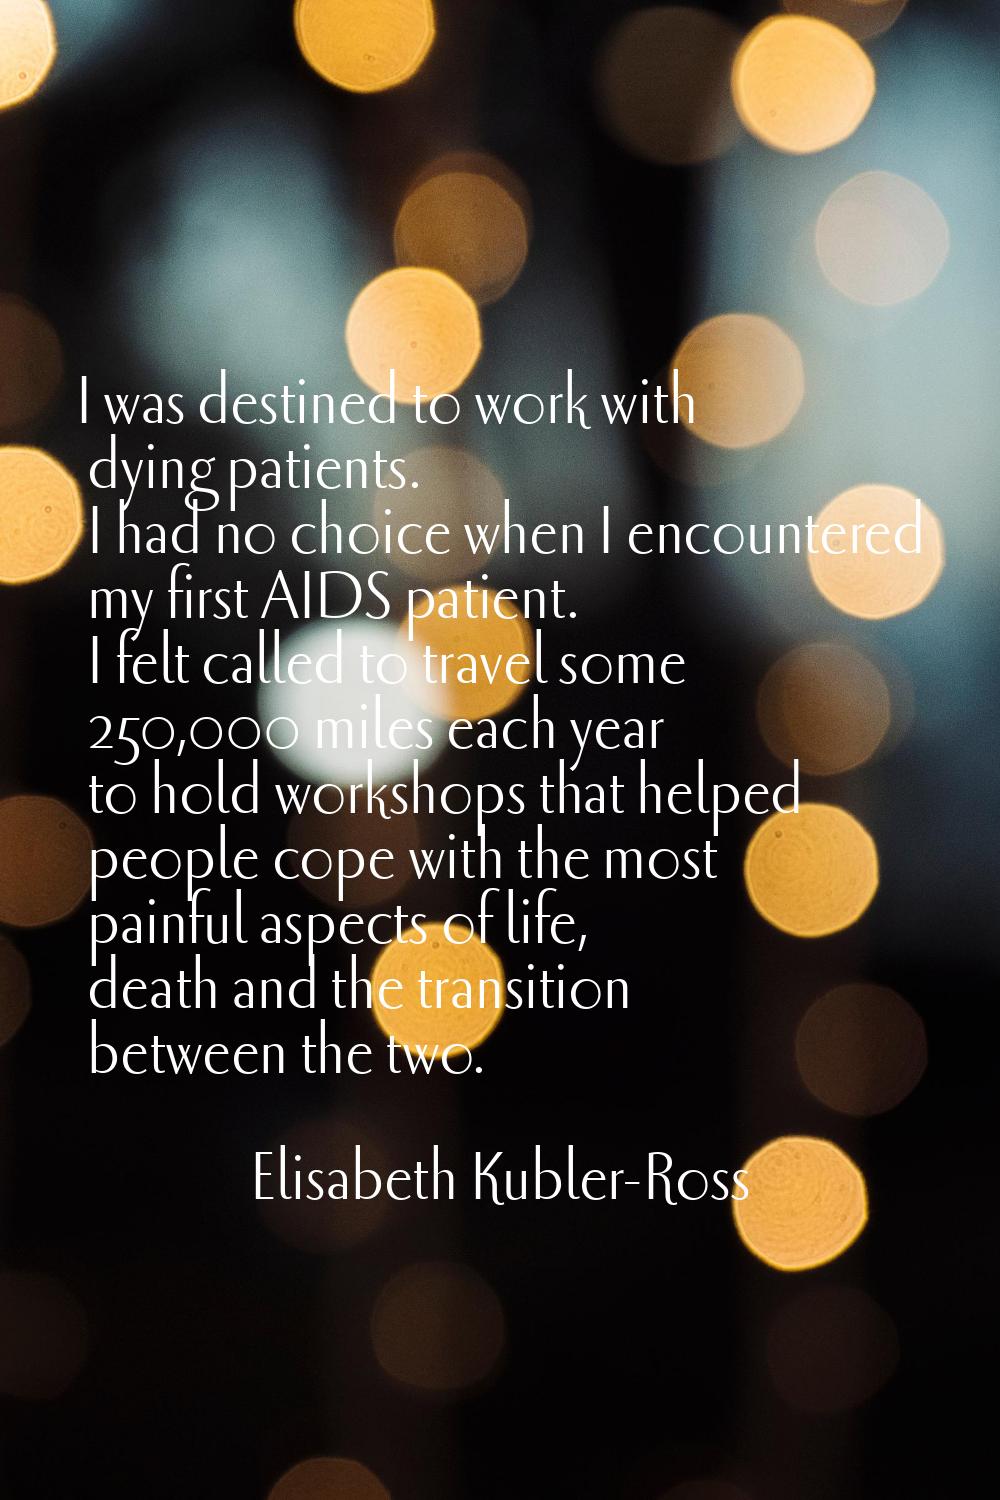 I was destined to work with dying patients. I had no choice when I encountered my first AIDS patien